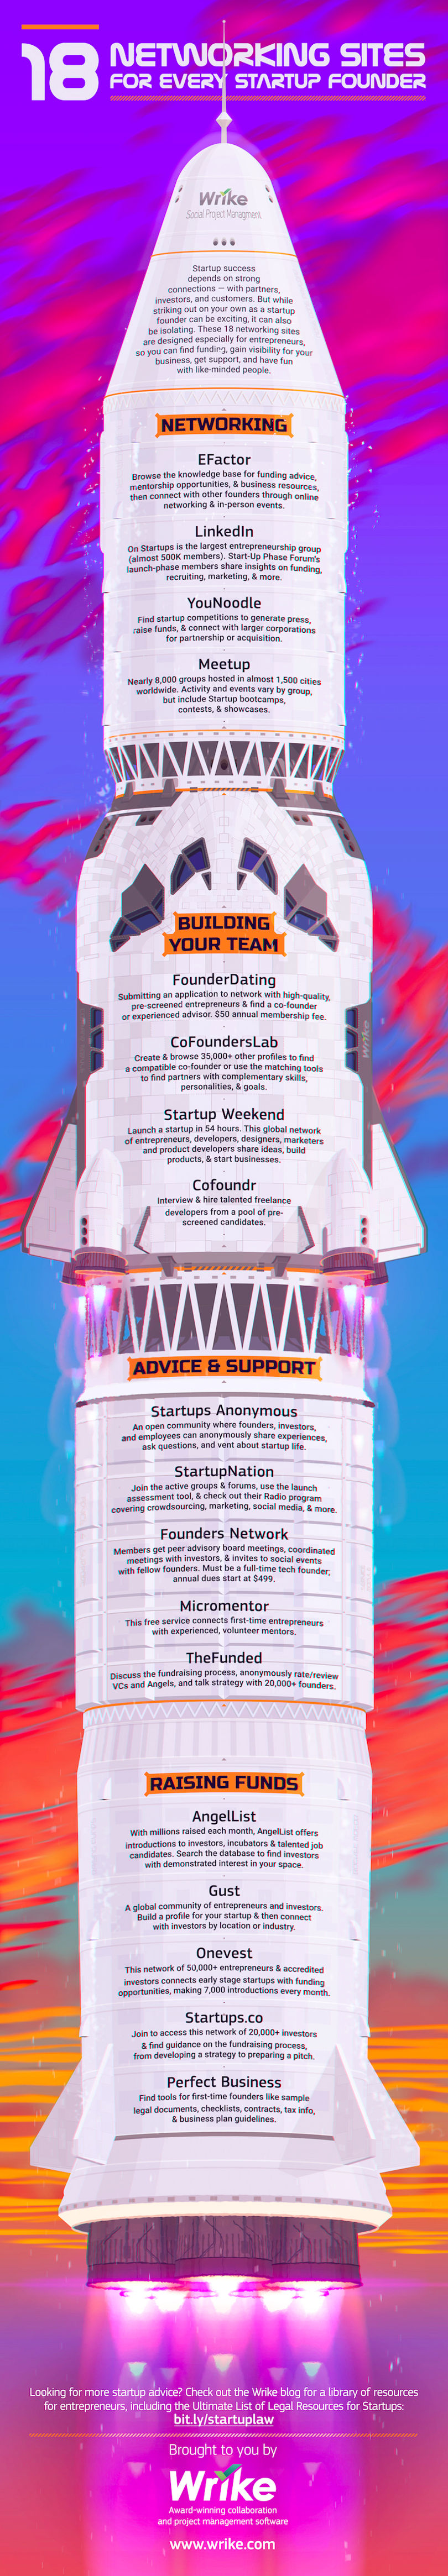 Top networking sites for startups - infographic